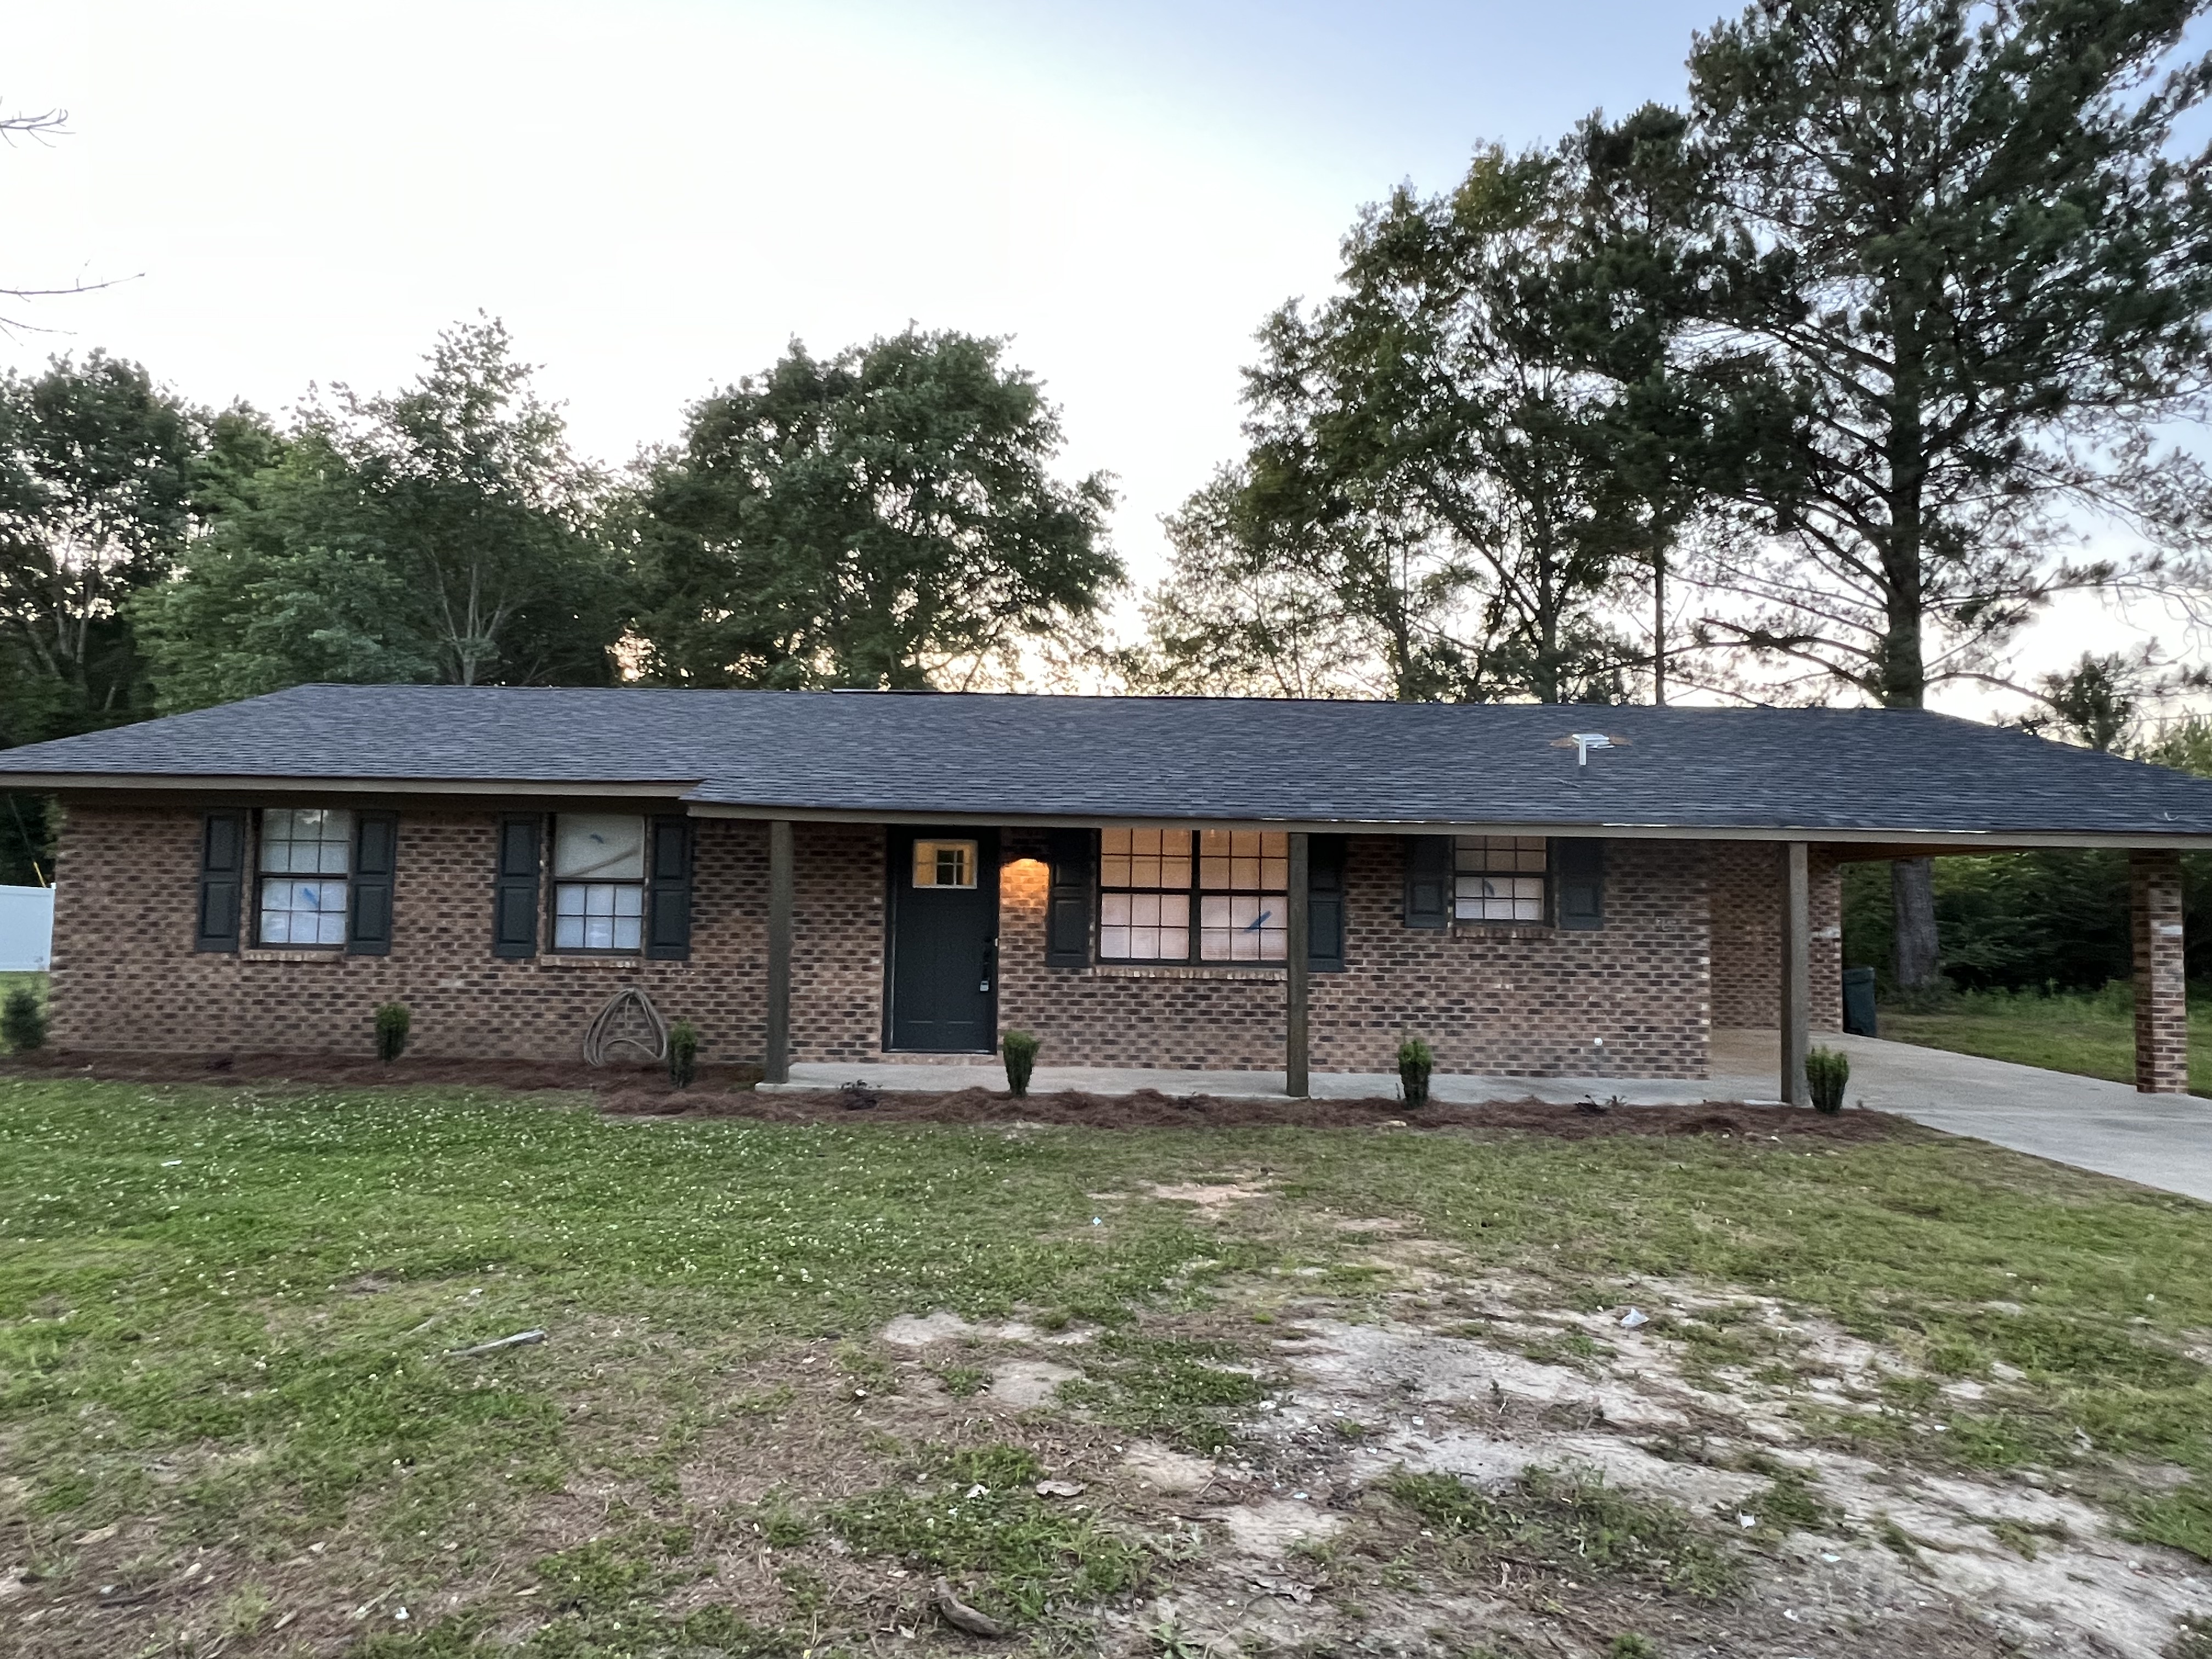 Collins, MS Complete Home Renovation - Before and After